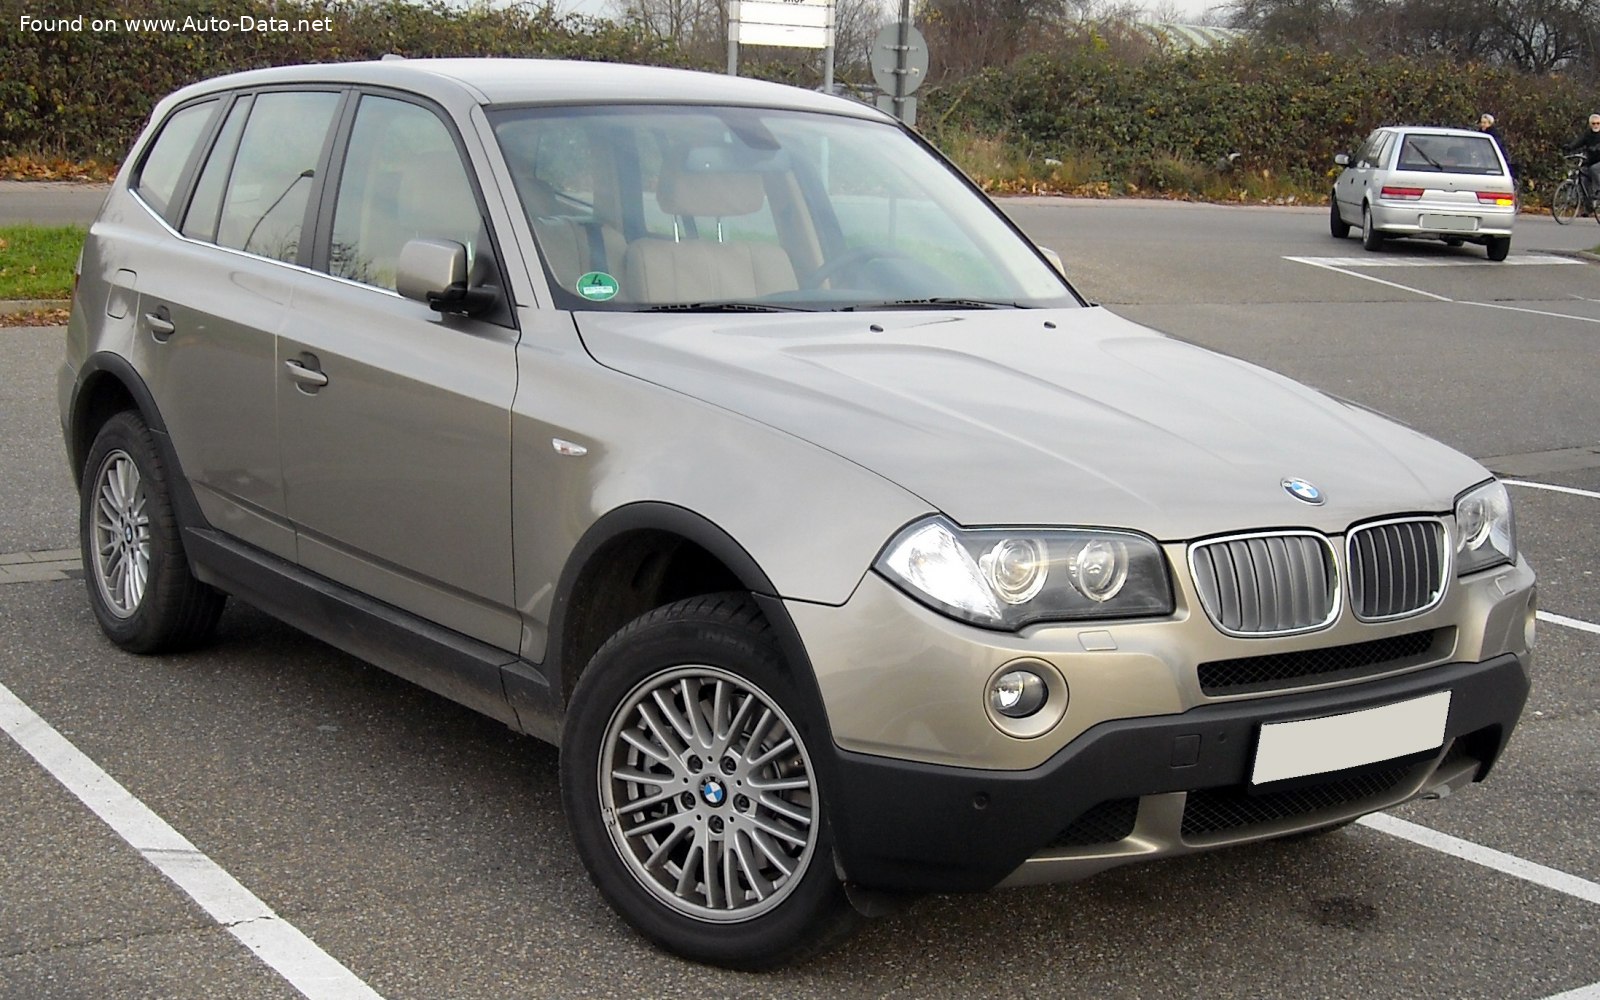 2006 BMW X3 (E83, facelift 2006) 3.0sd (286 PS) Automatic